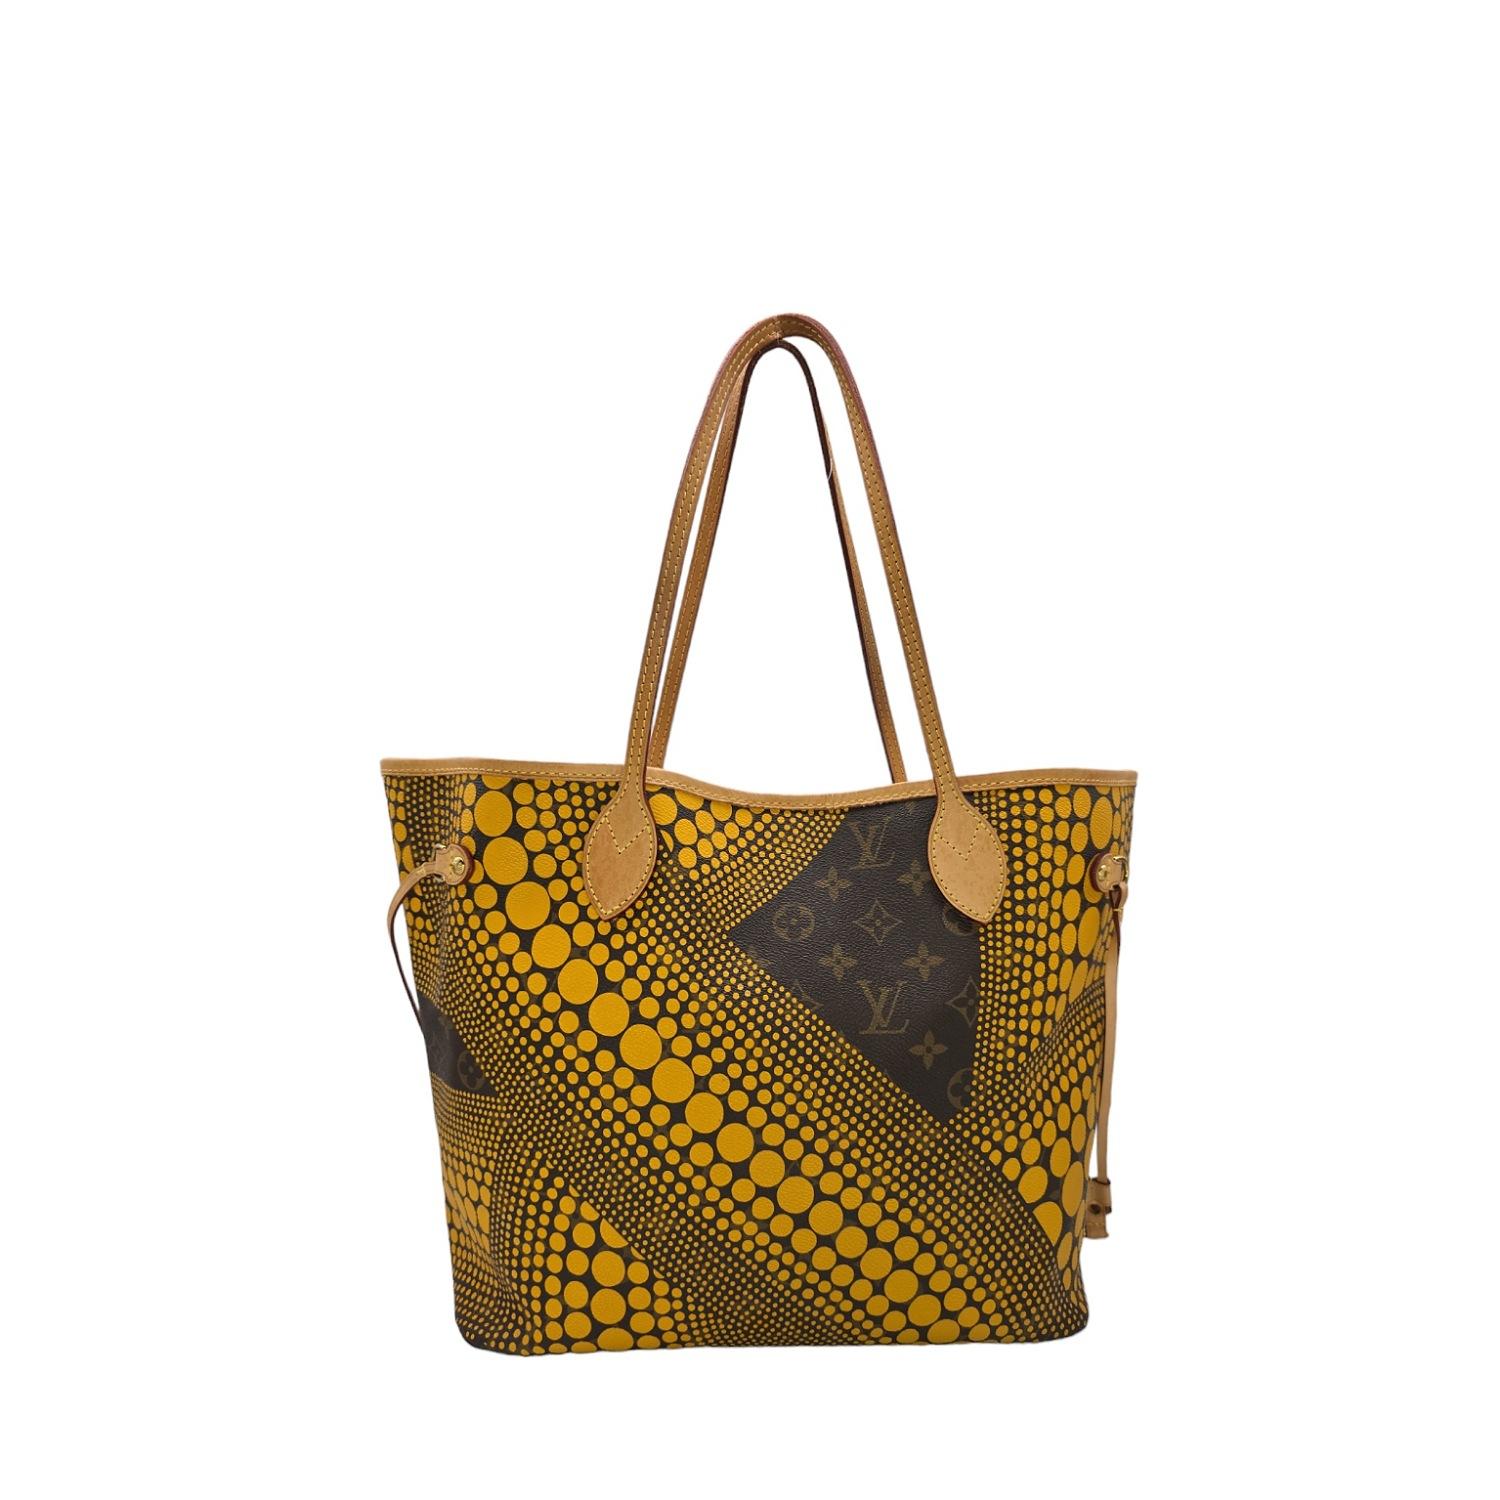 Louis Vuitton Yayoi Kusama X Wave Neverfull MM Tote In Good Condition For Sale In Scottsdale, AZ